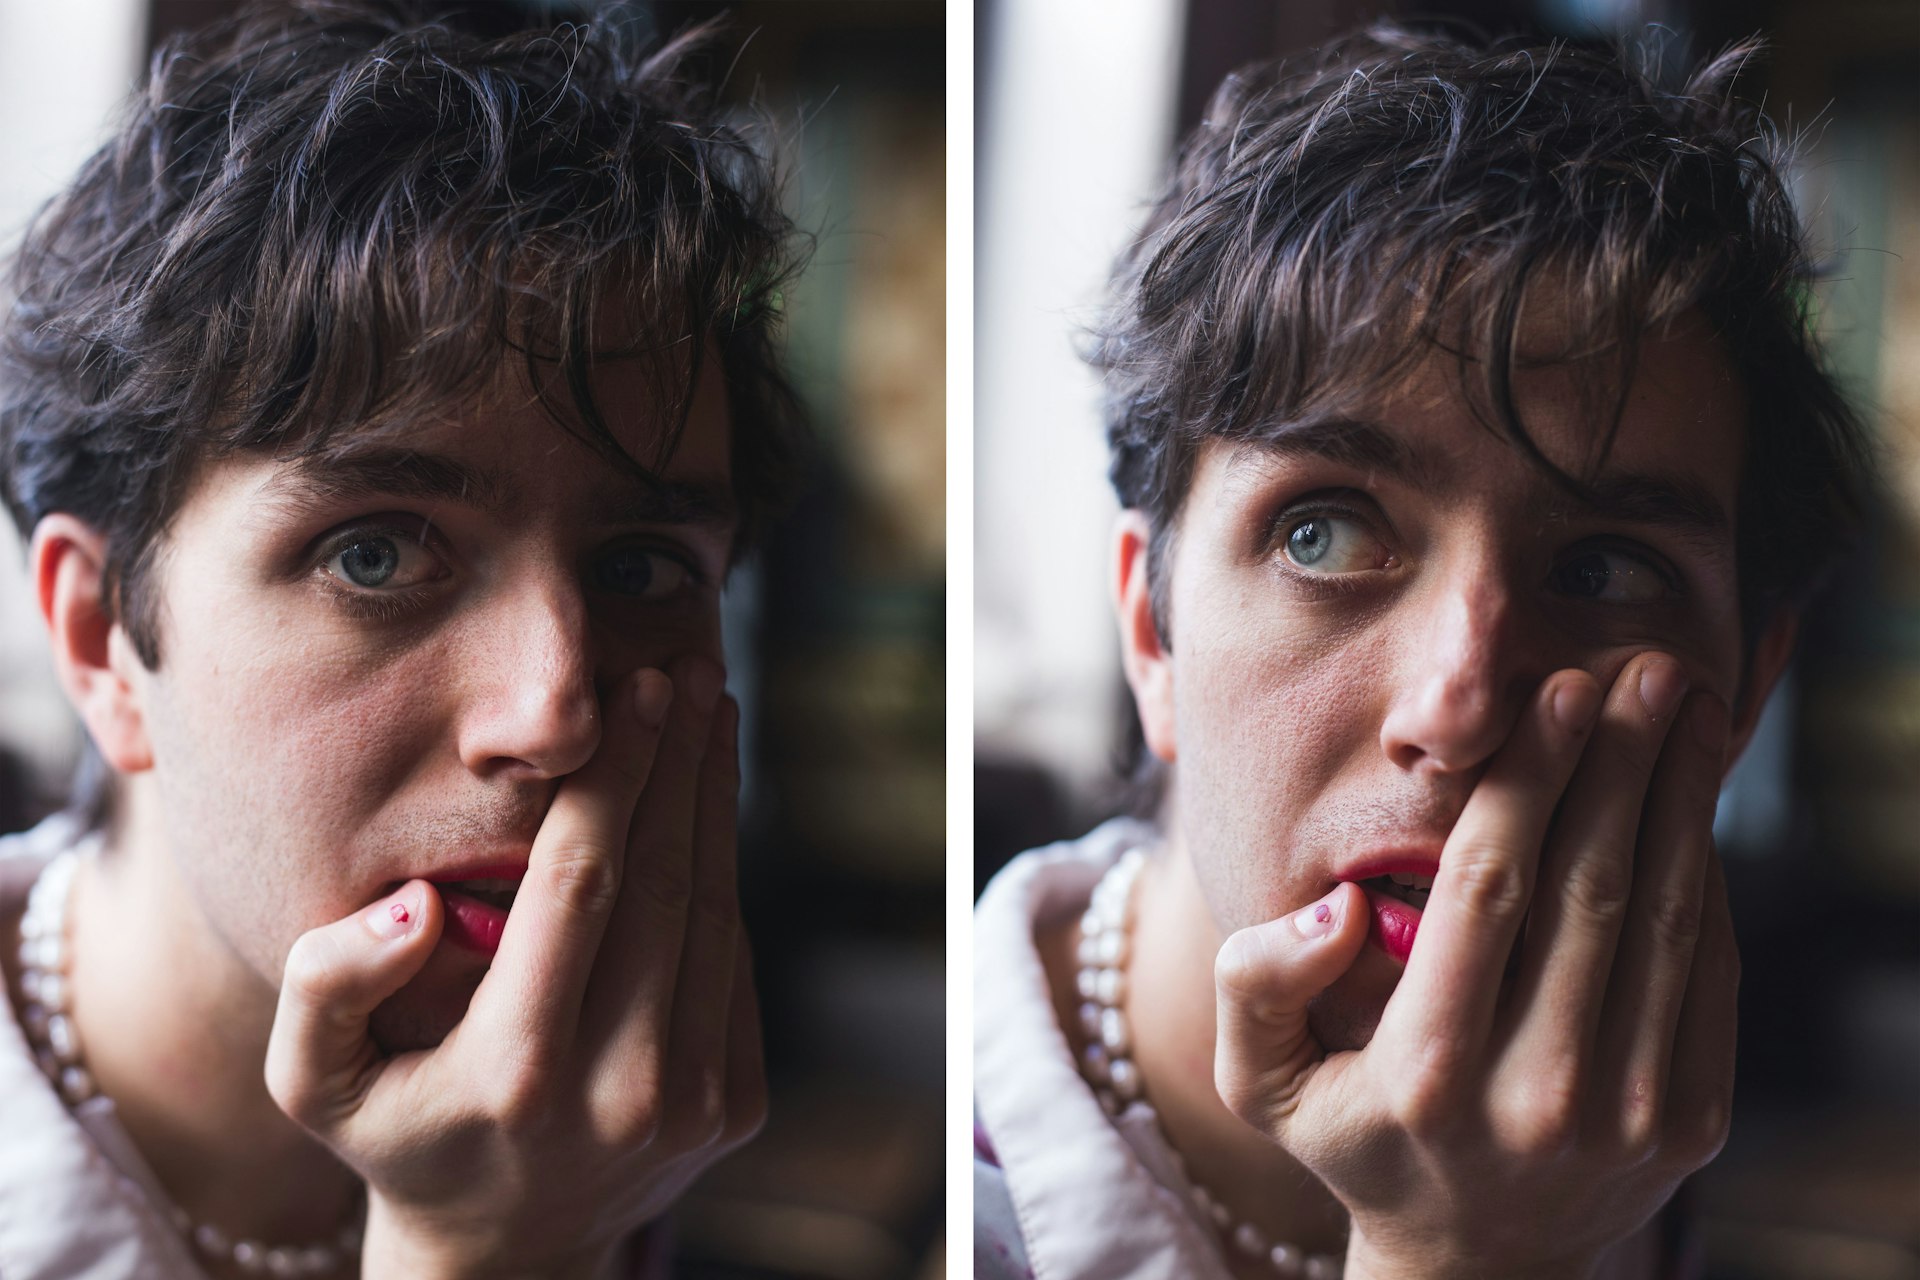 Ezra Furman: 'All queer people have to escape from a prison'